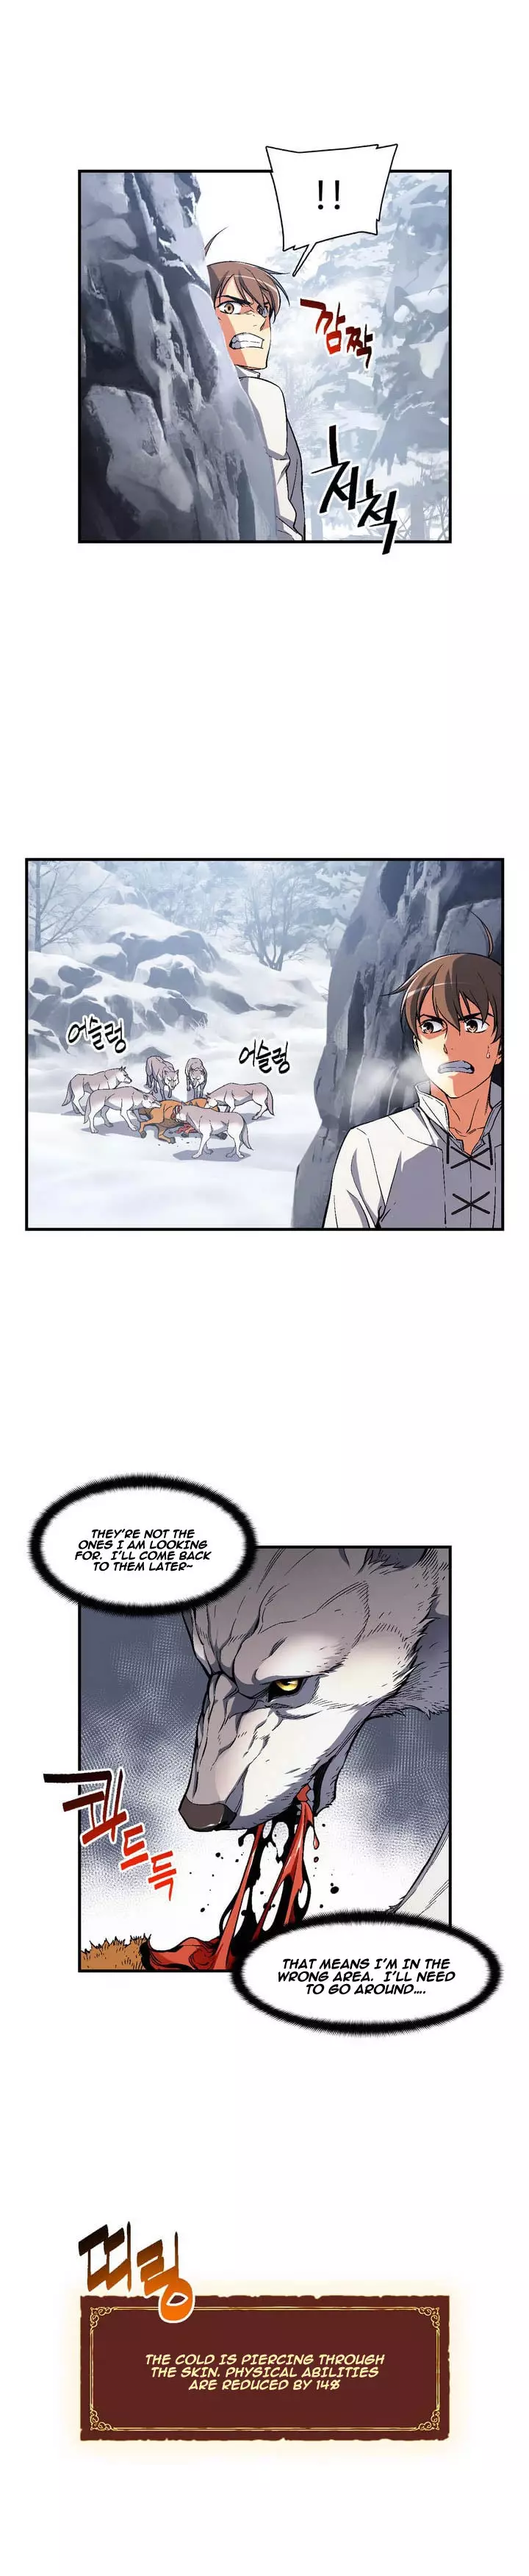 The Legendary Moonlight Sculptor - 74 page 8